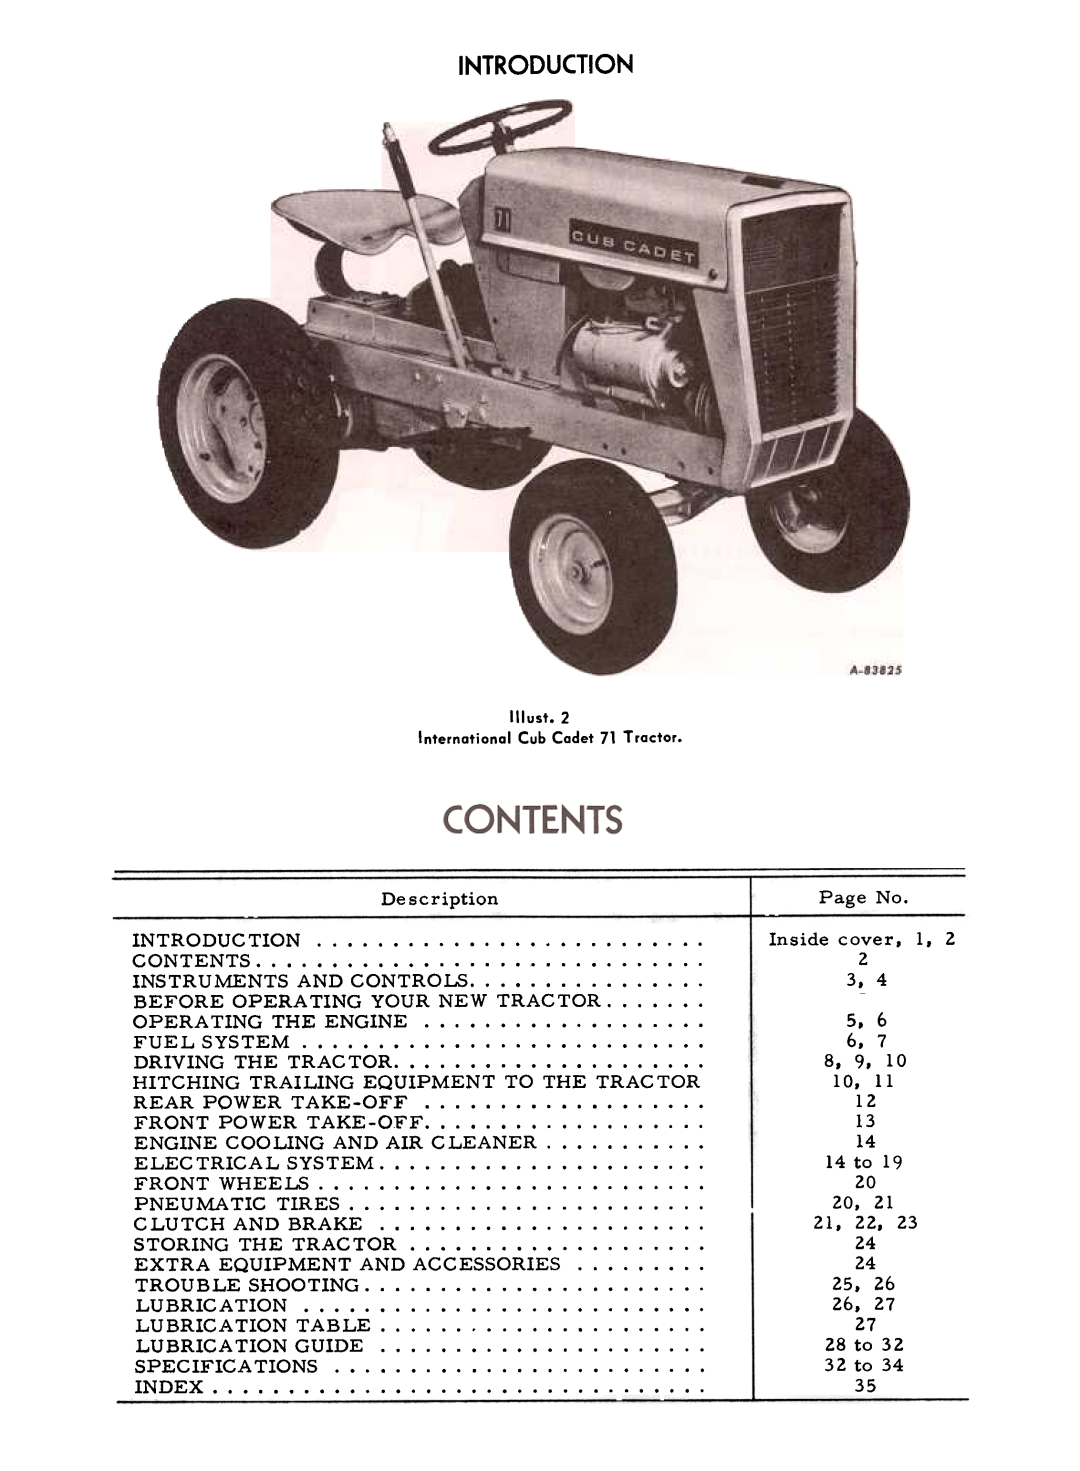 Cub Cadet 71 manual 8. 9, 21. 22, 32 to, Page No, 14 to, 28 to, Introduction, Engine Equipment, Trac 